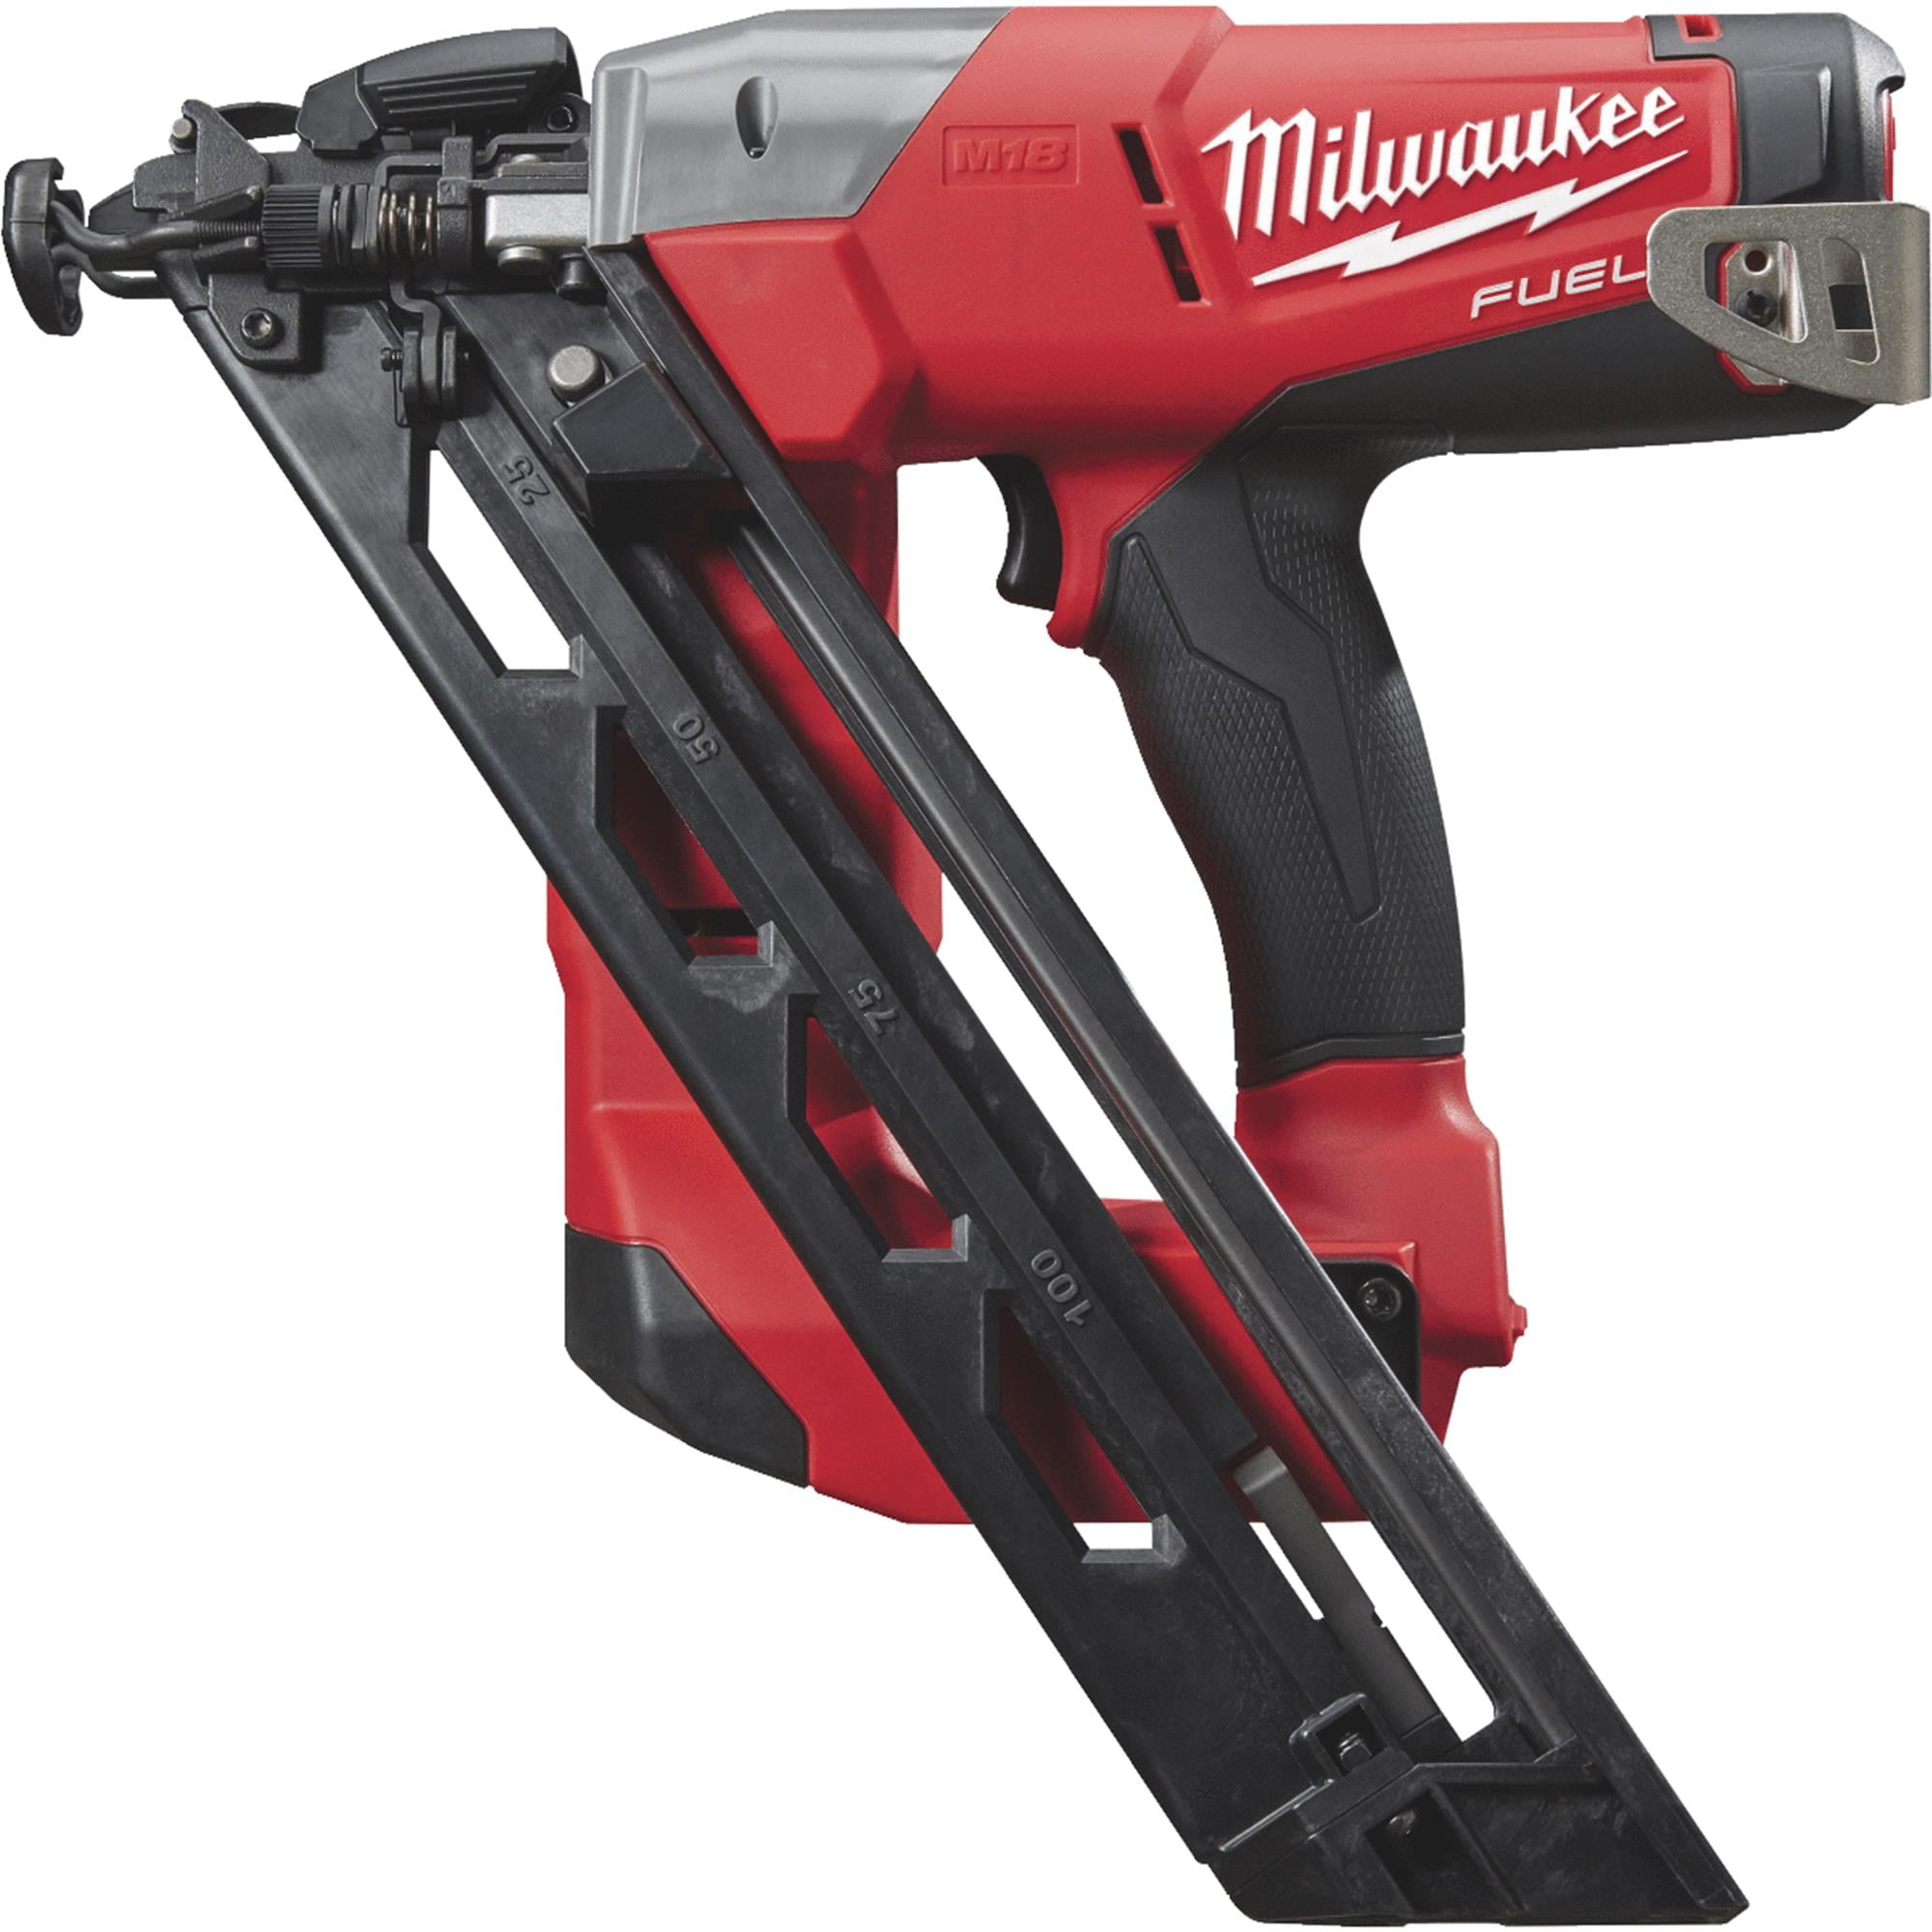 2742-20 for sale online Milwaukee M18 FUEL 16-Gauge Angled Finish Nailer 